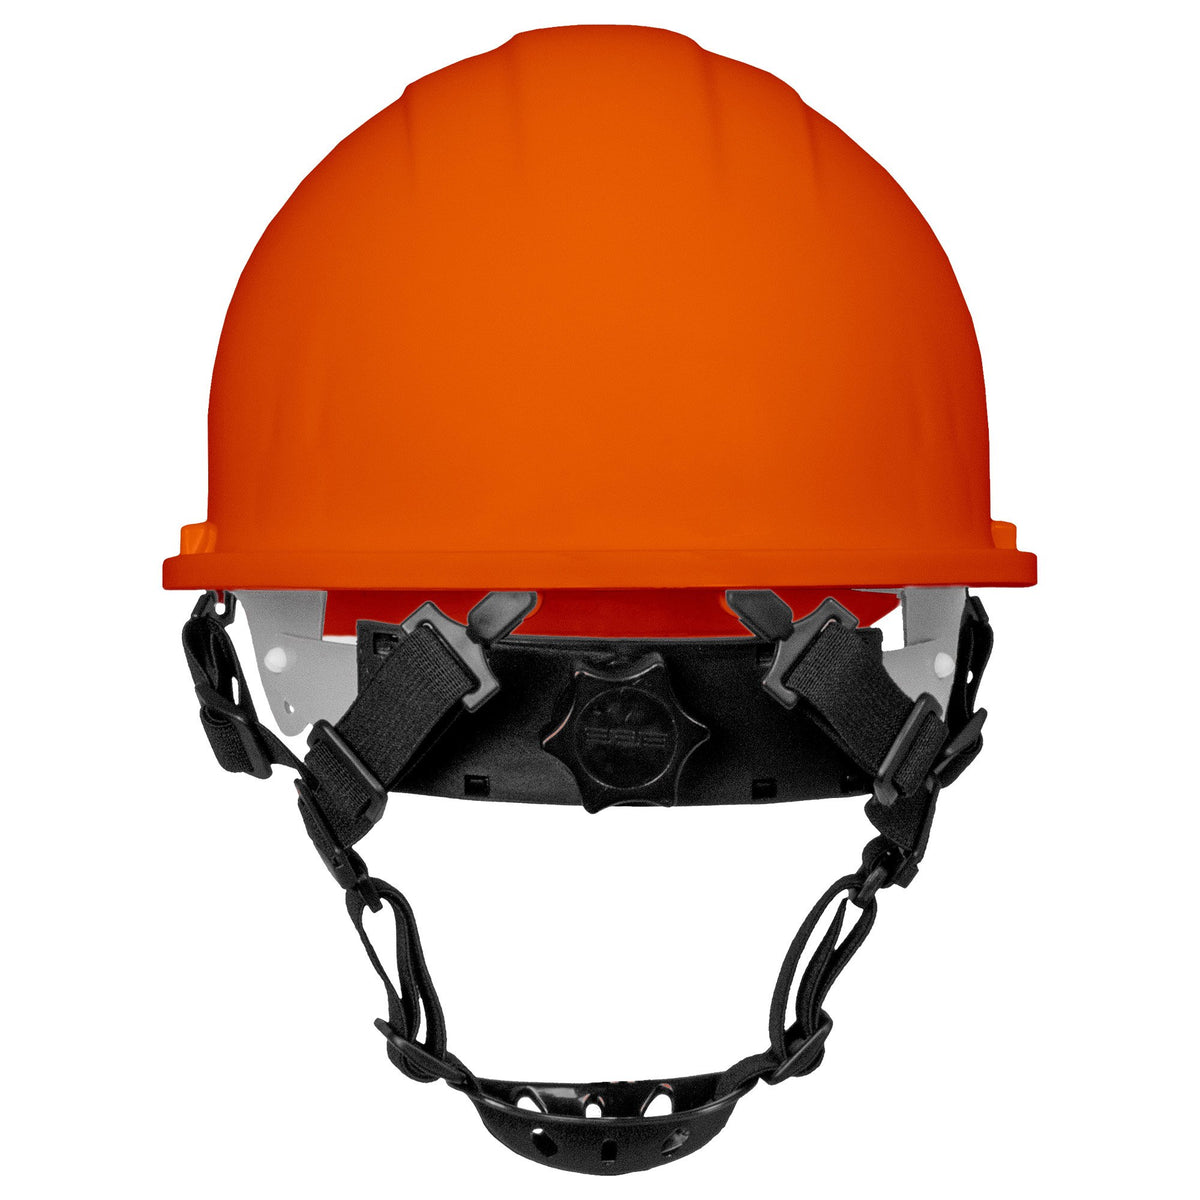 Americana® Cap designed for use with 2- and 4-Point Chin Straps (sold separately)